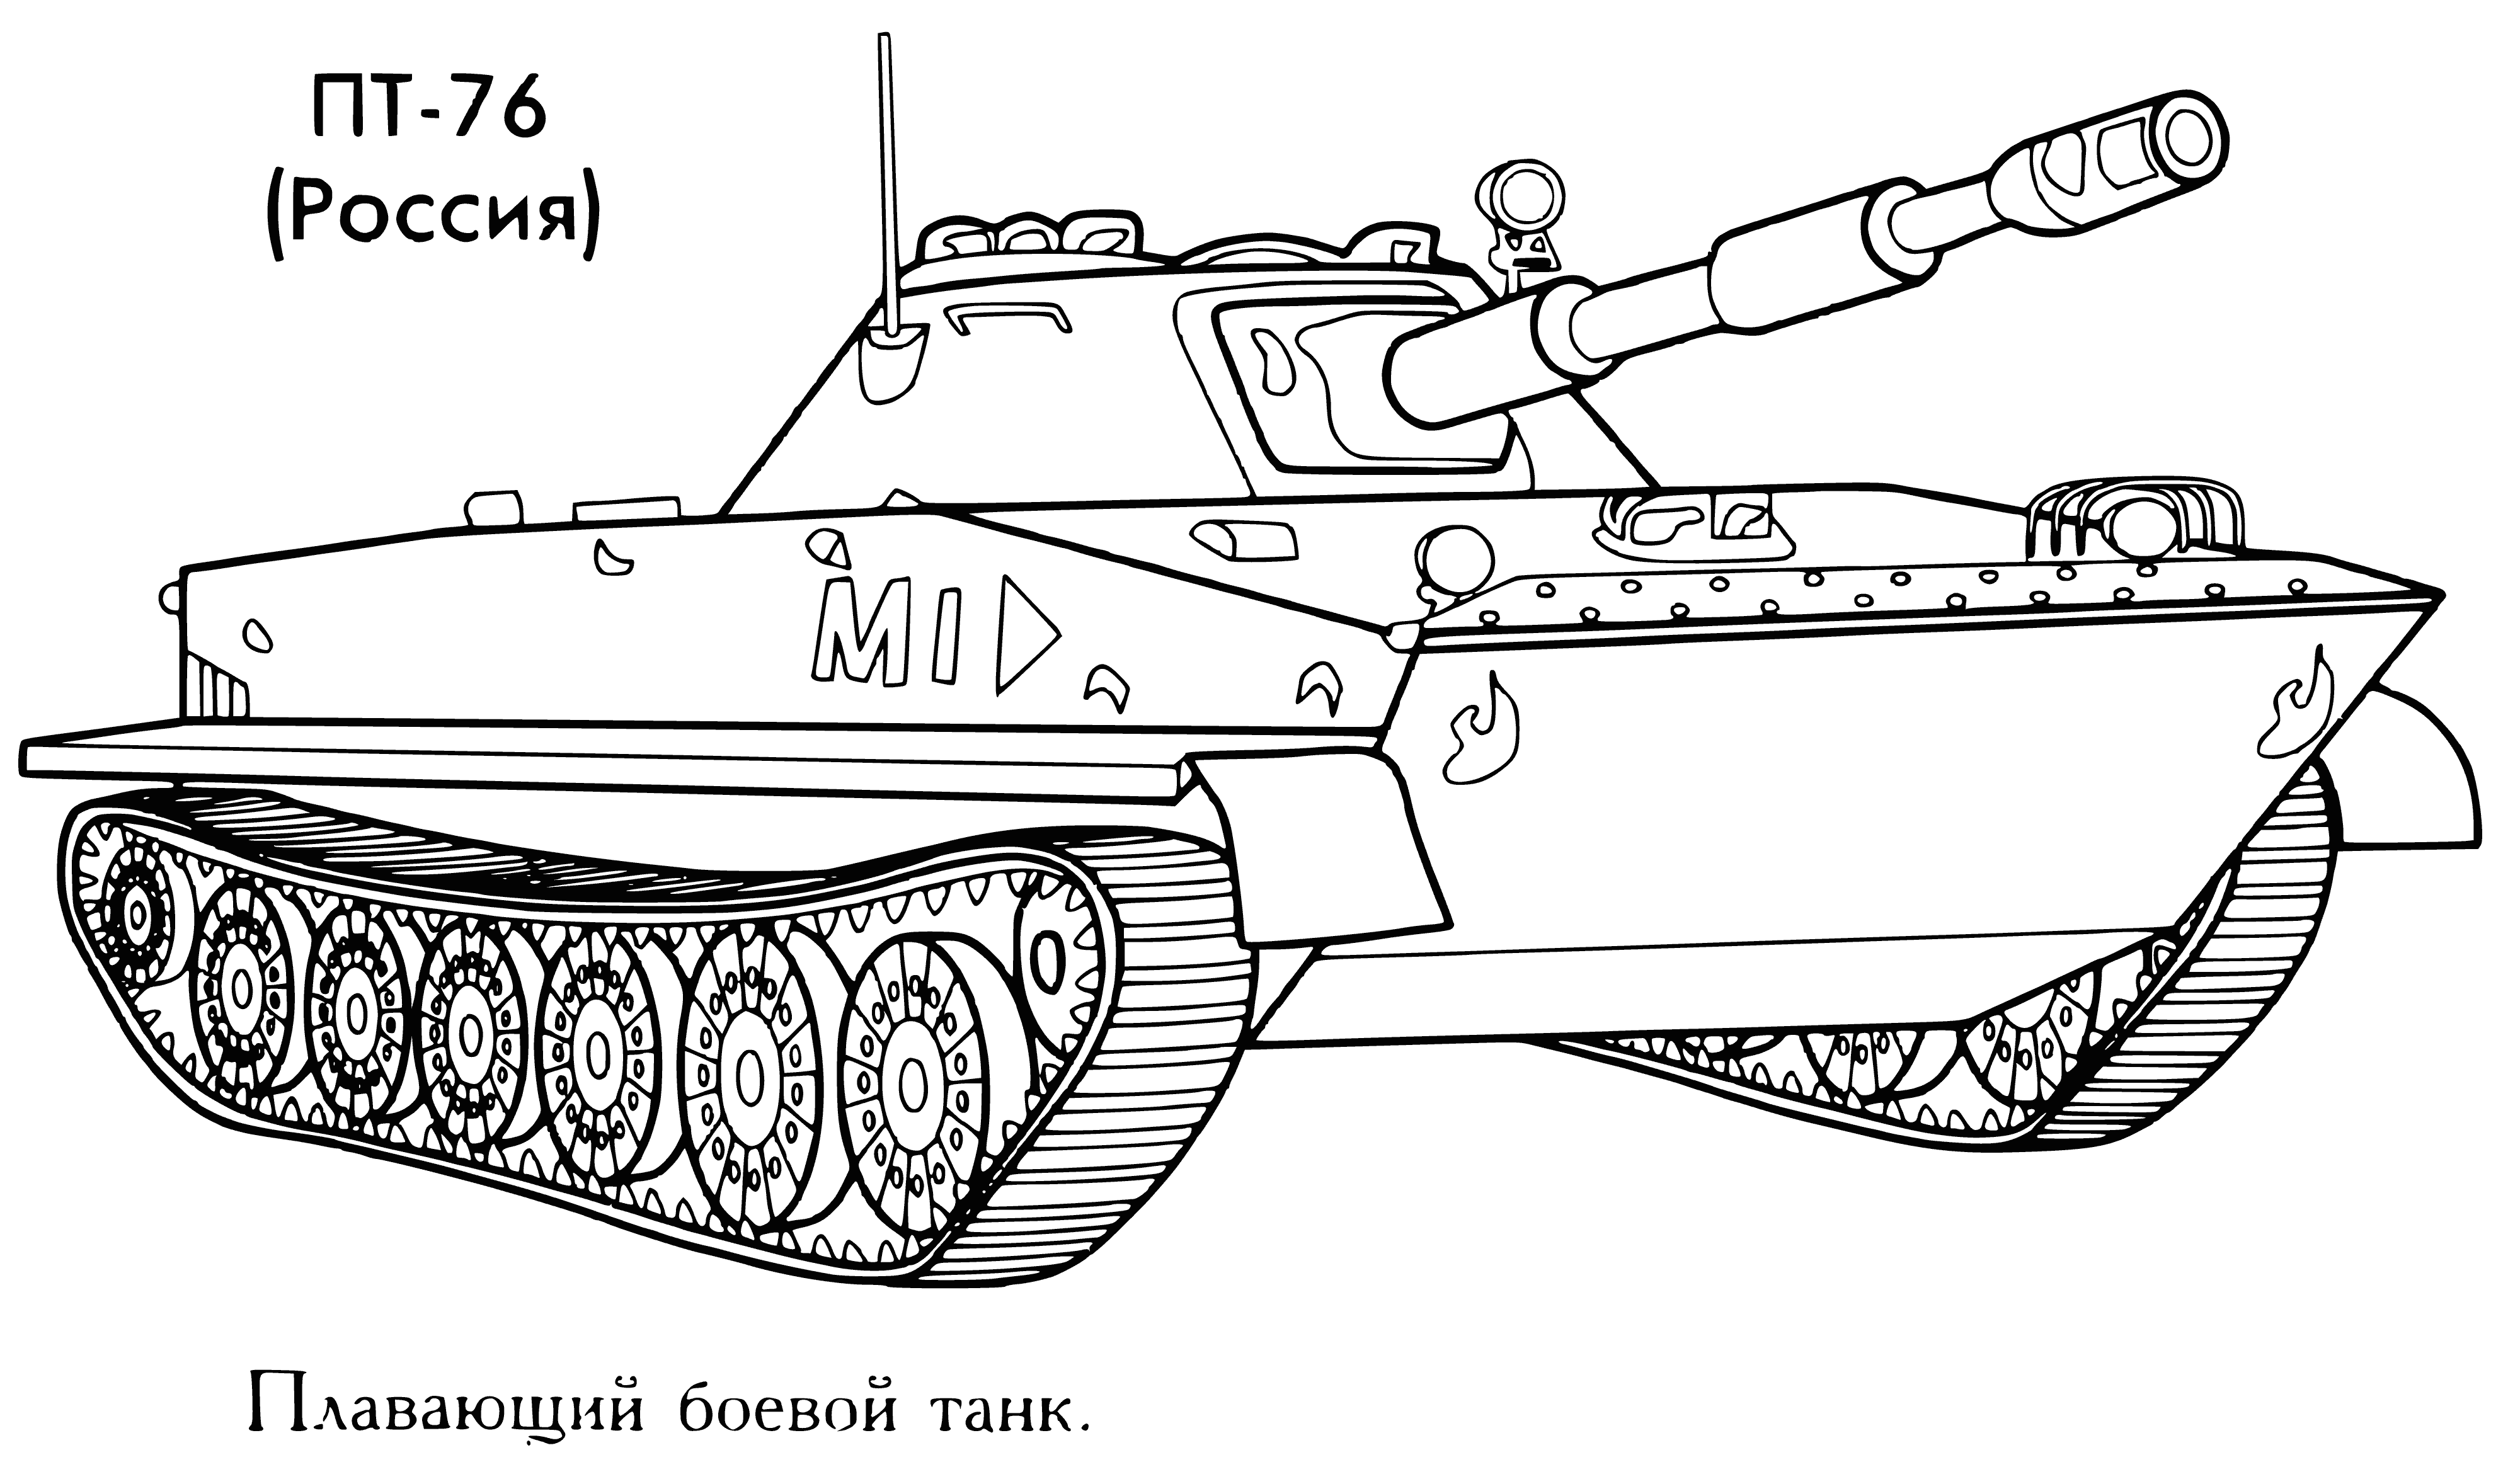 coloring page: Floating battle tanks equipped with special propellers and skirts provide flotation and movement in water.